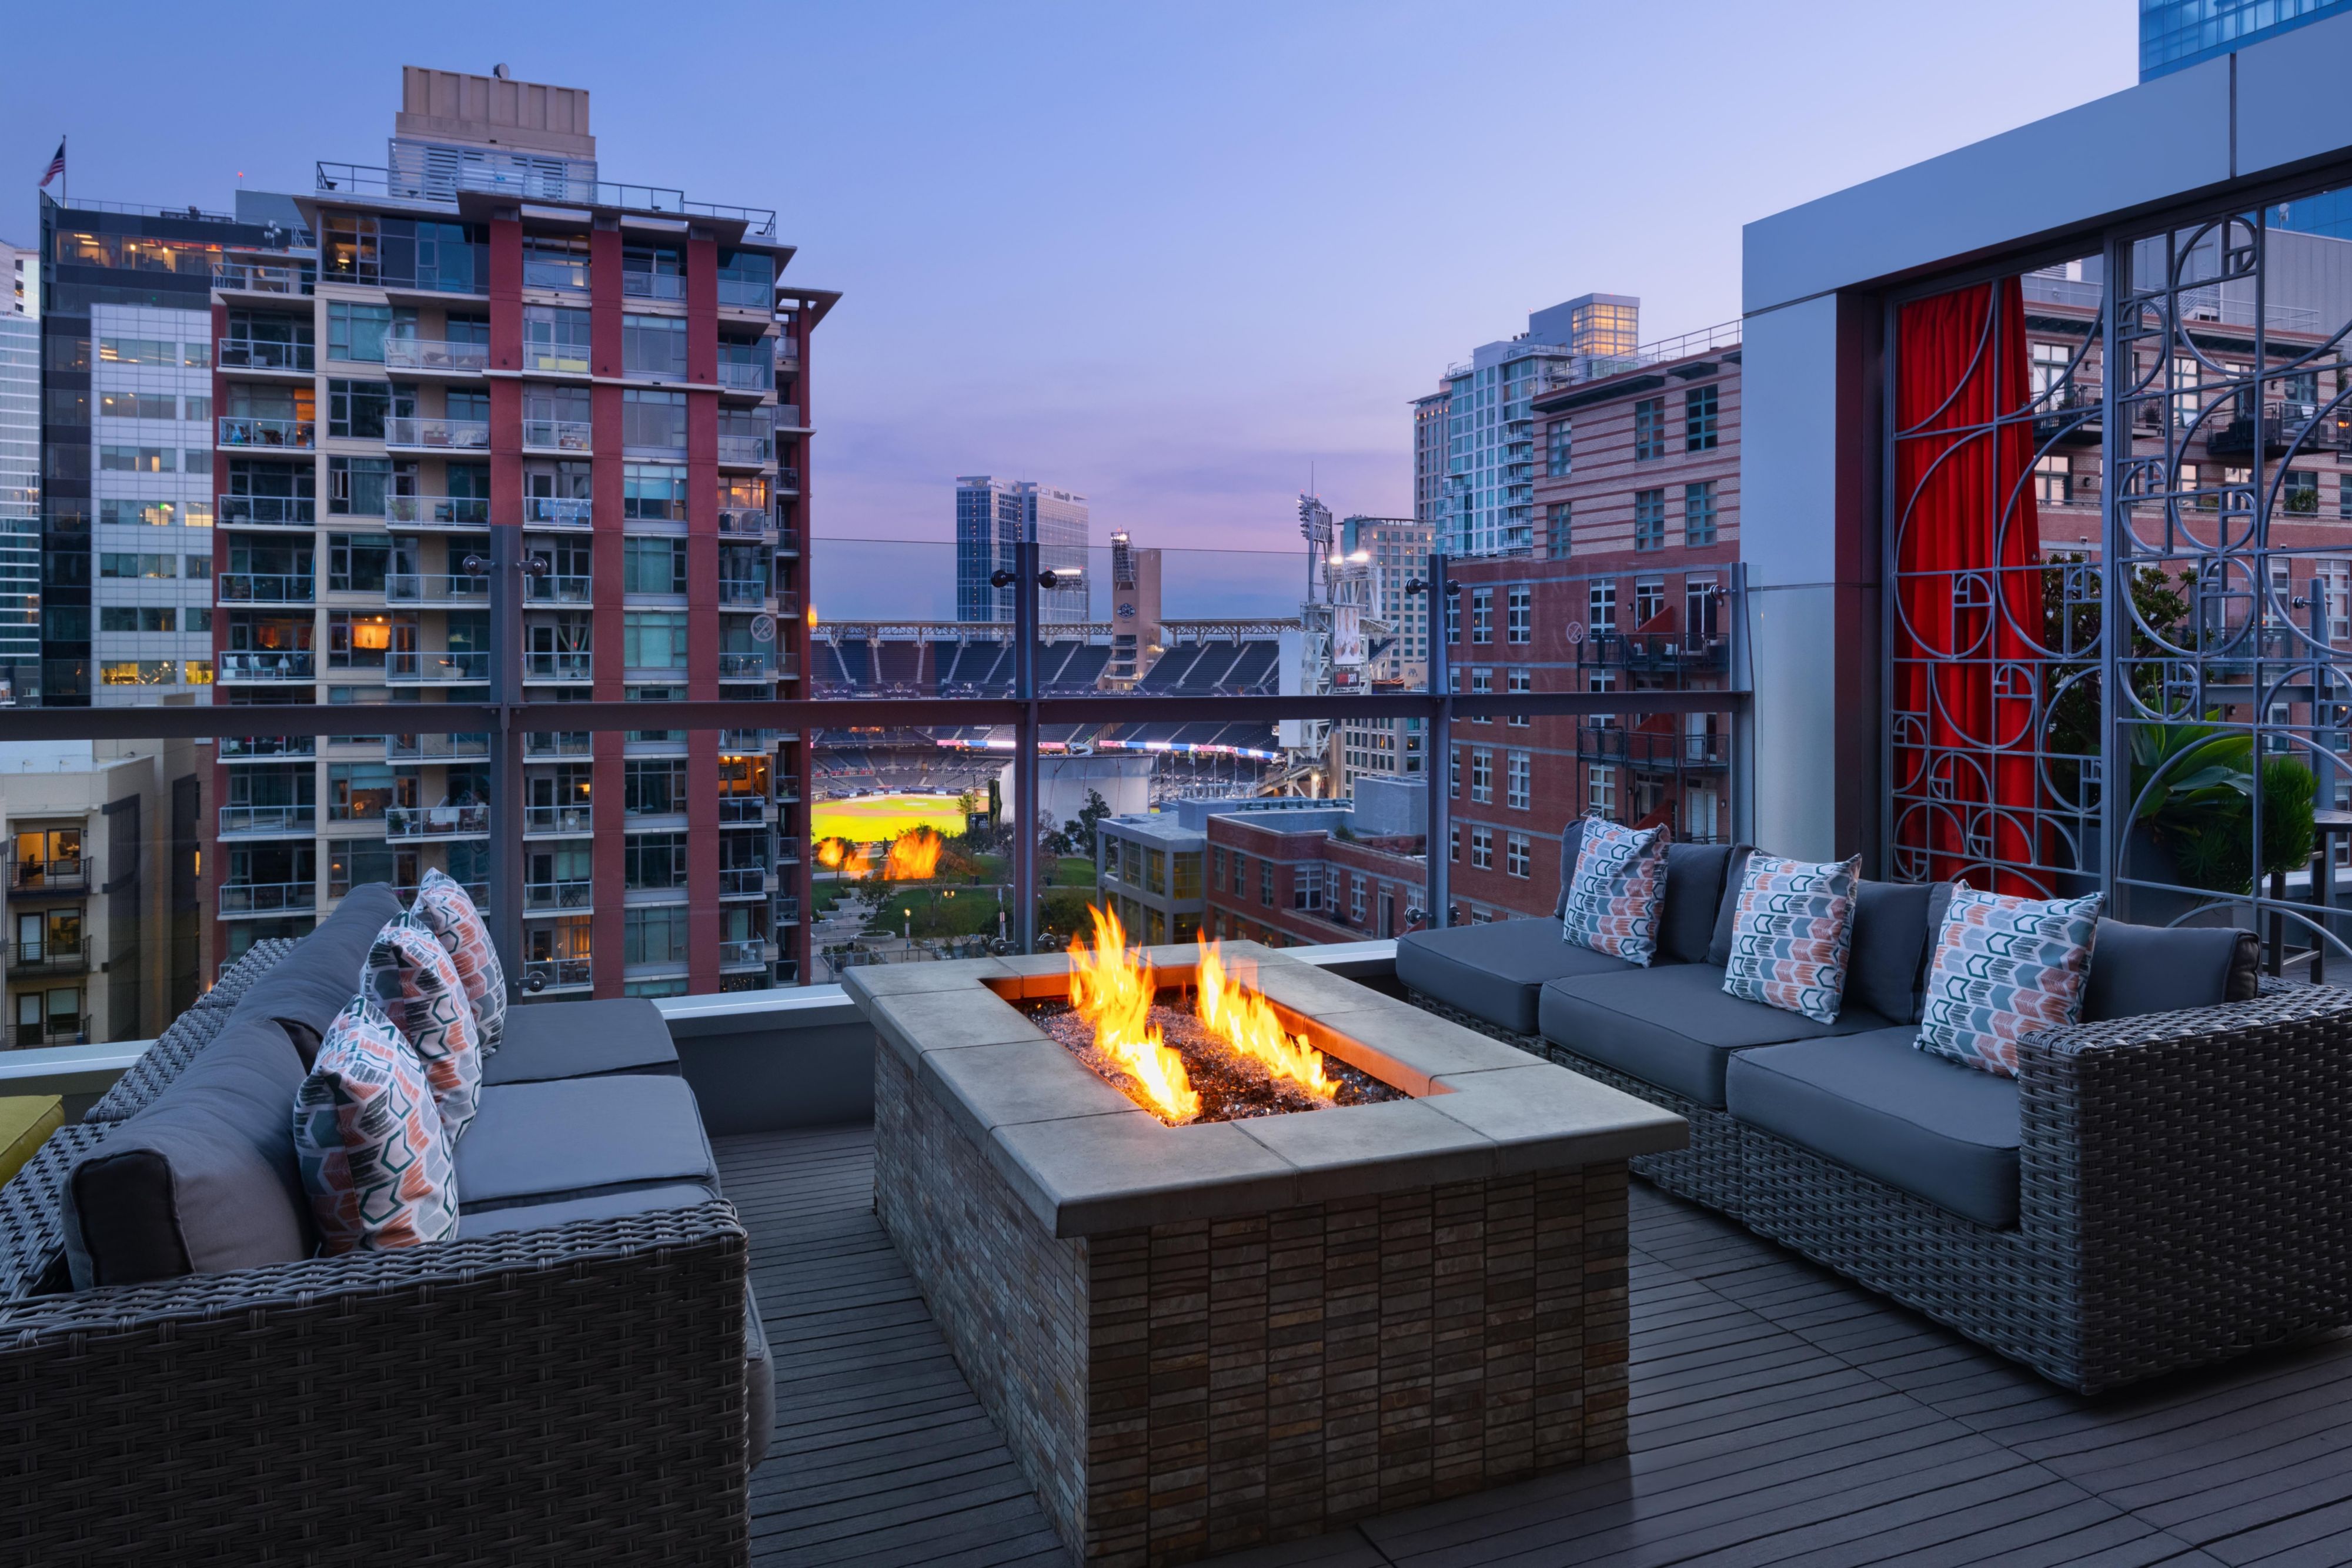 Located on the 9th floor overlooking Petco Park in the East Village Neighborhood, our Level 9 Rooftop bar features fire-pit seating with scenic views of the San Diego Skyline and colorful sunsets. It is a local favorite for its cocktails and dog-friendly staff.